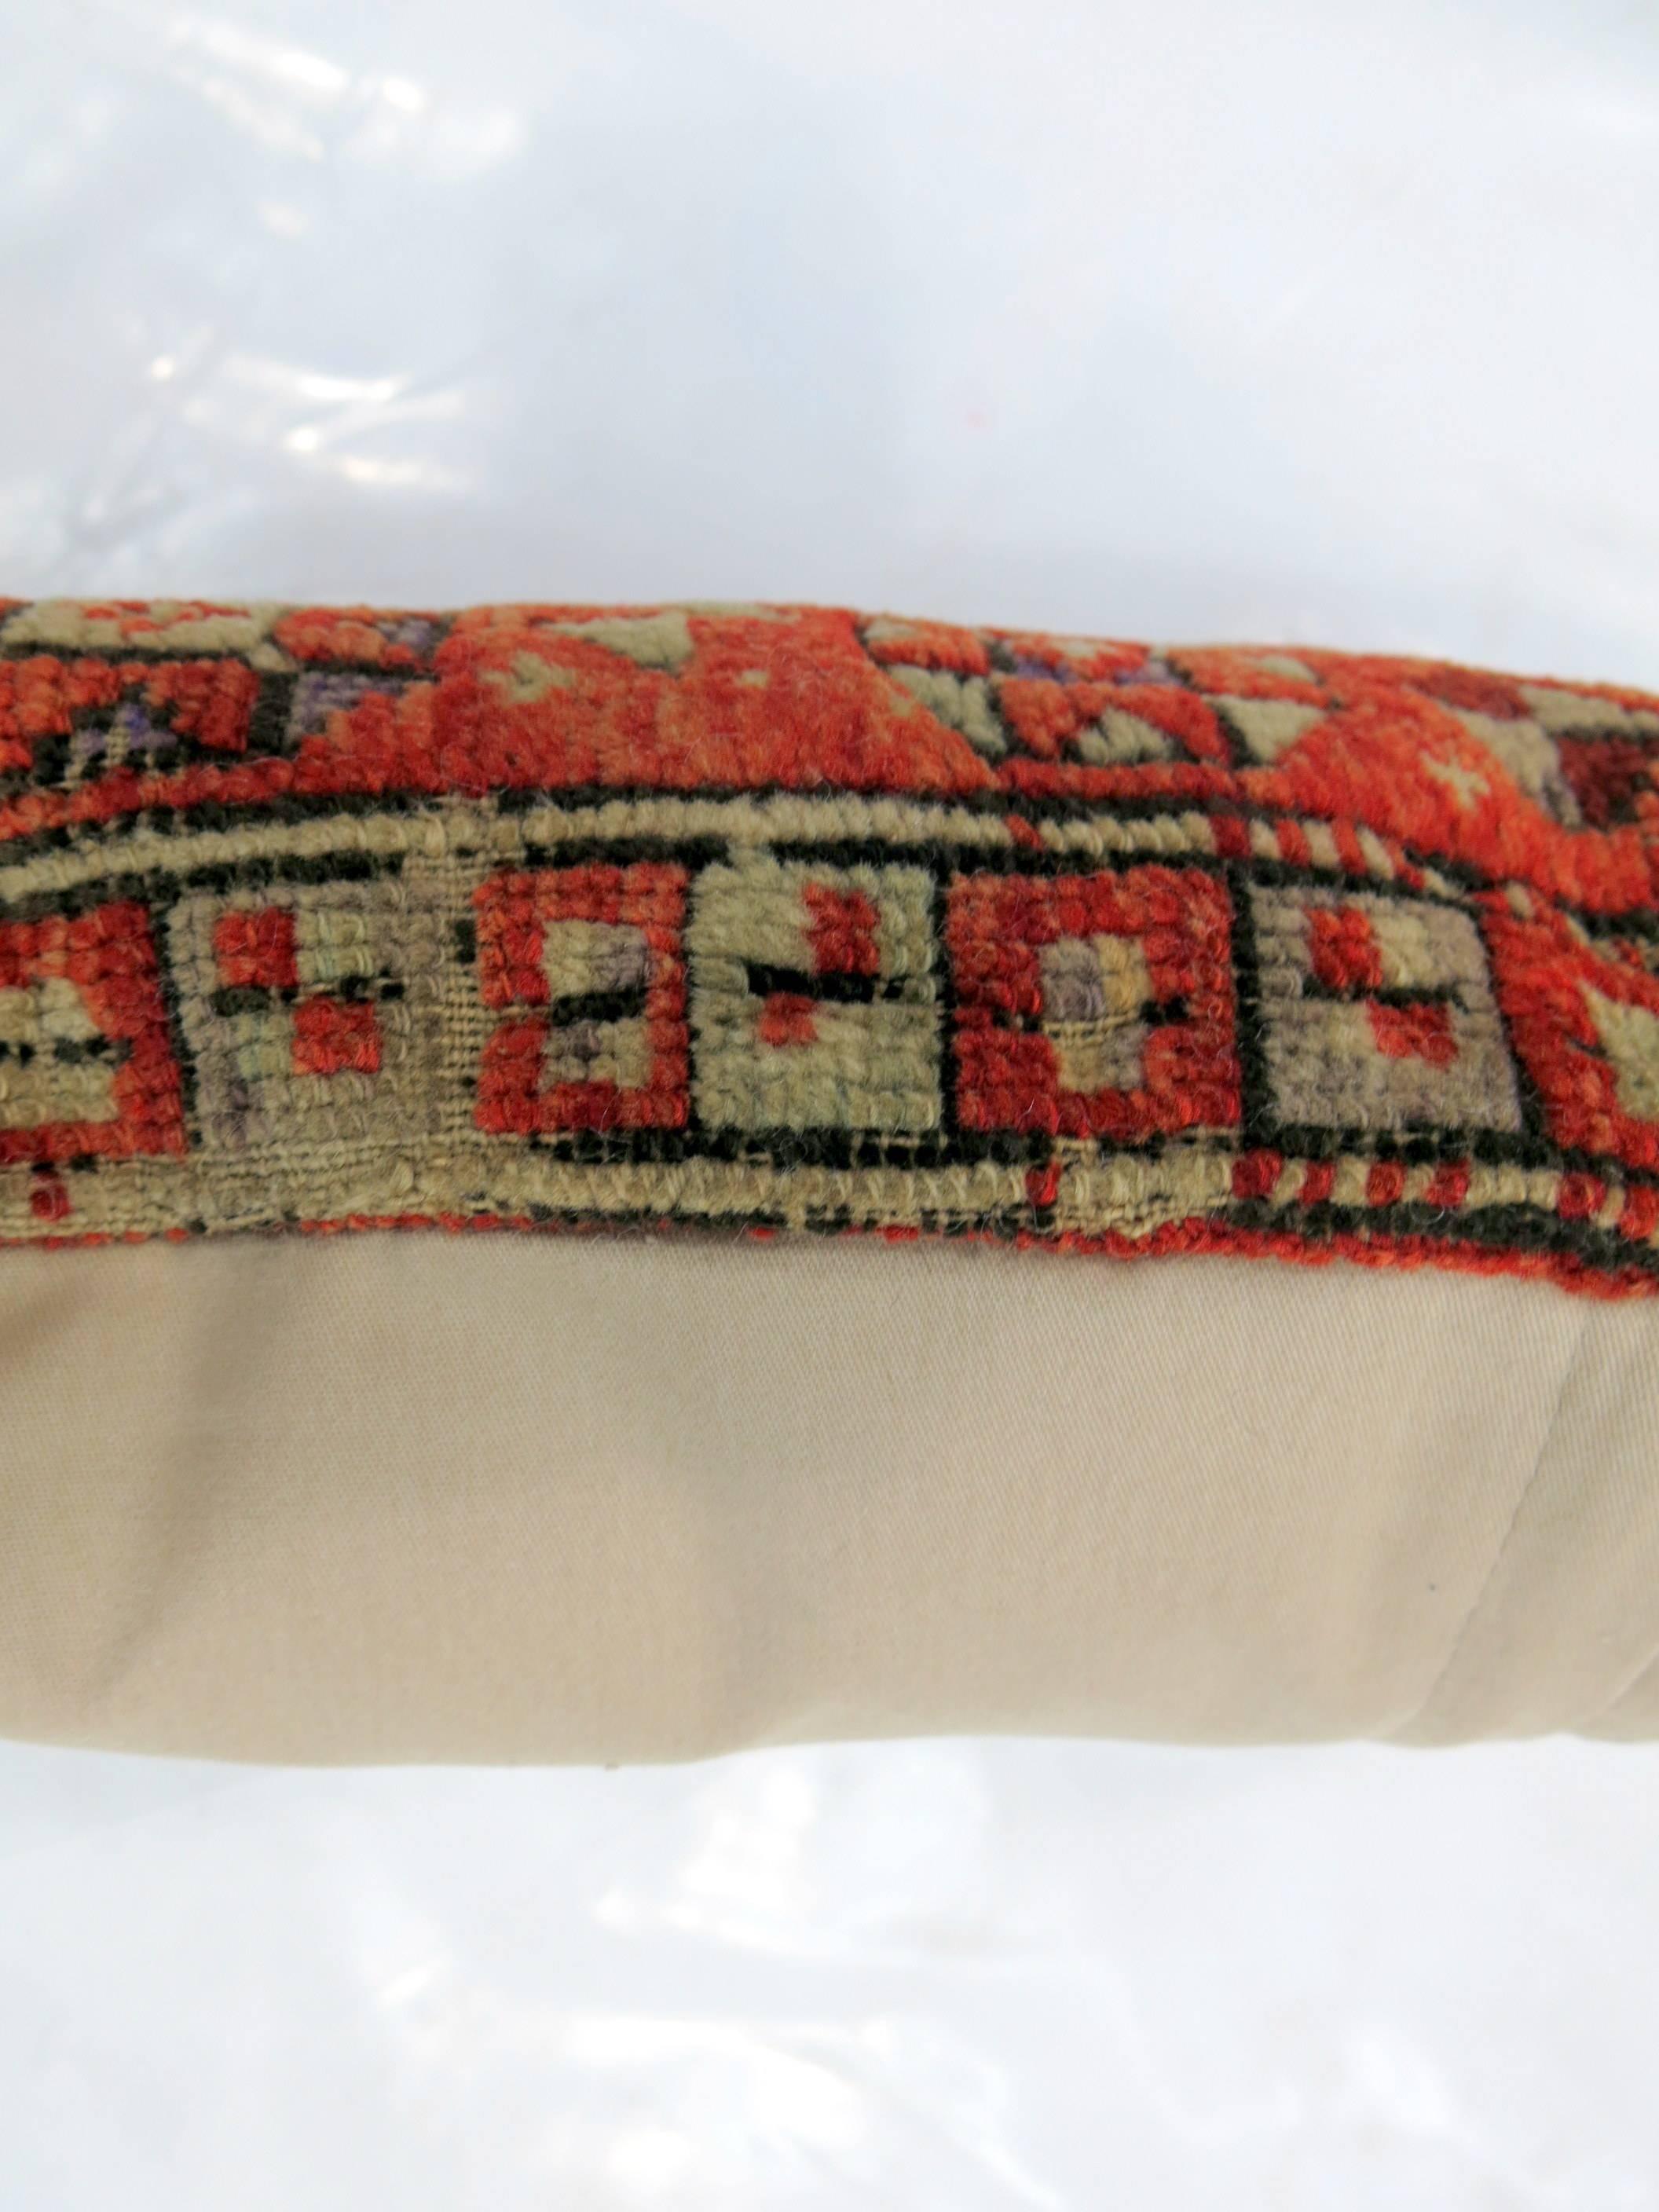 Pillow made from an orange color mid 20th century Turkish Anatolian rug.

12'' x 20